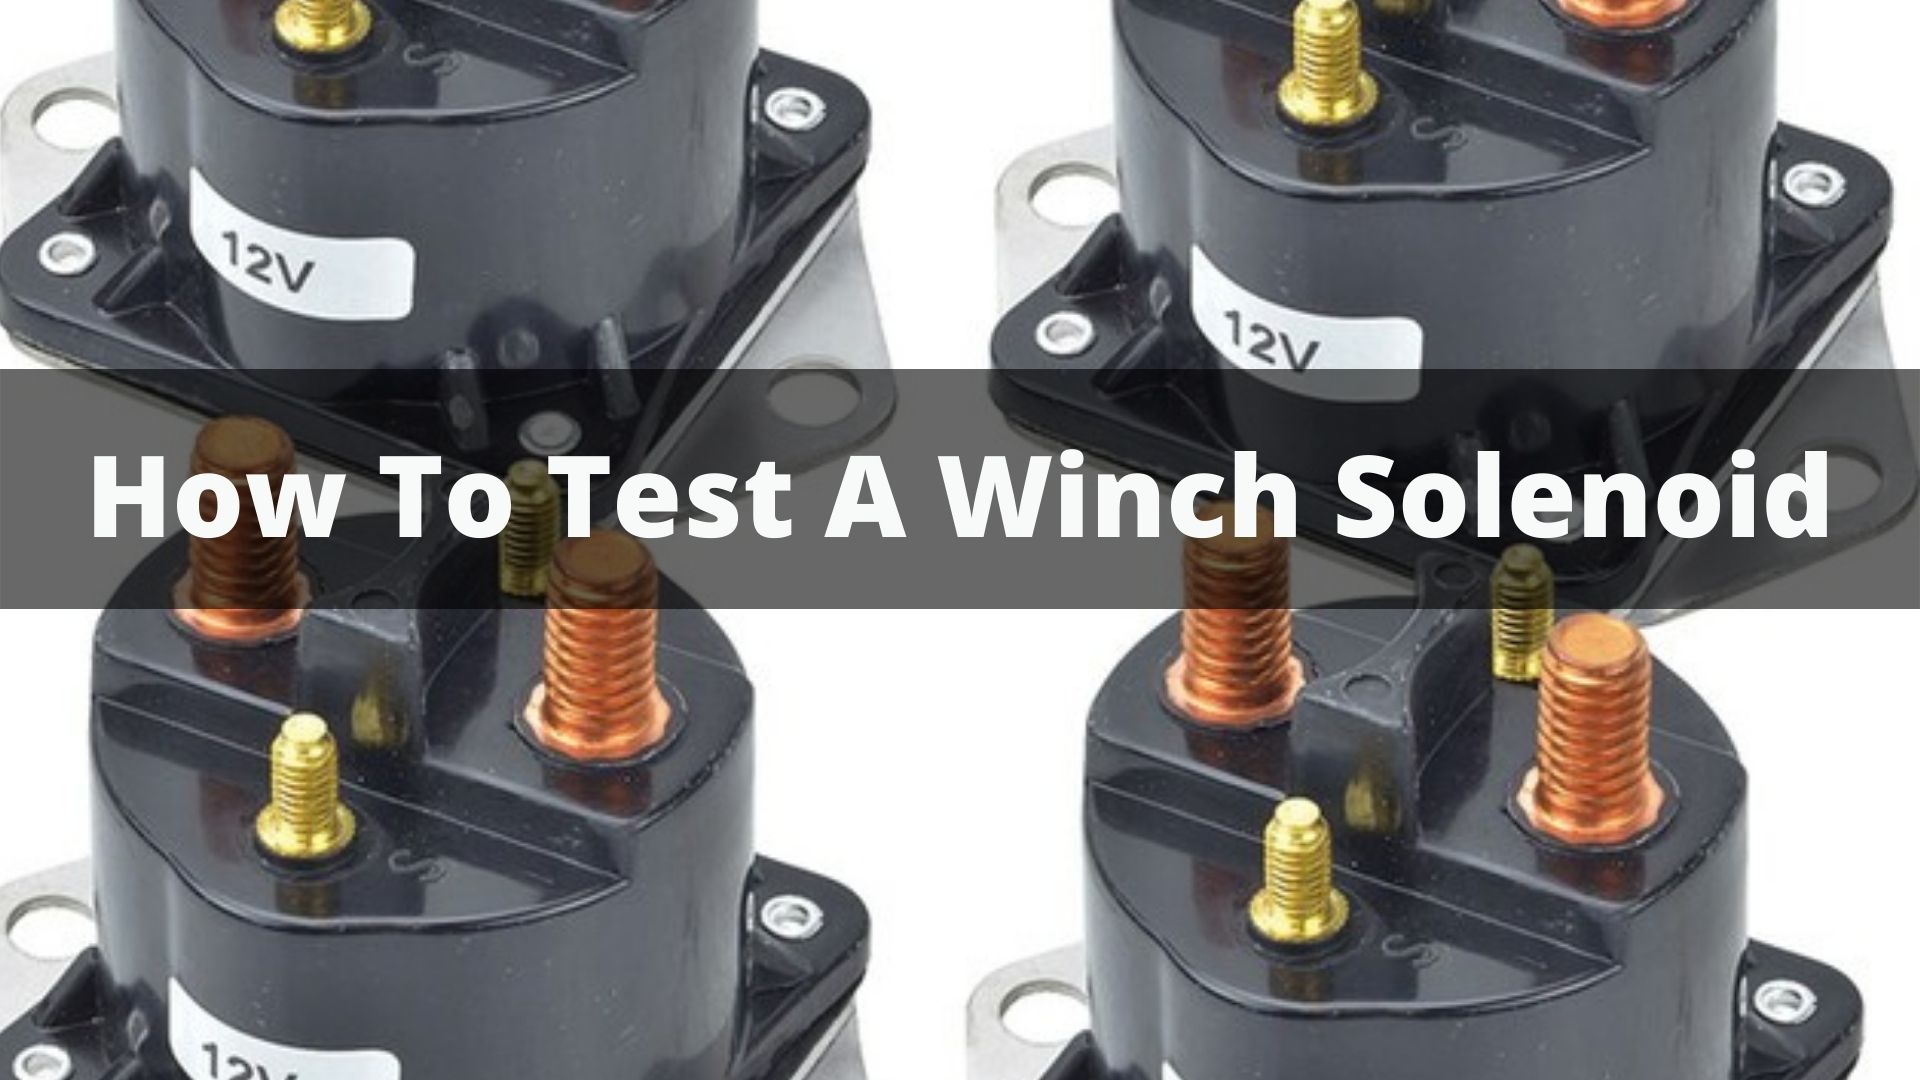 How To Test A Winch Solenoid?